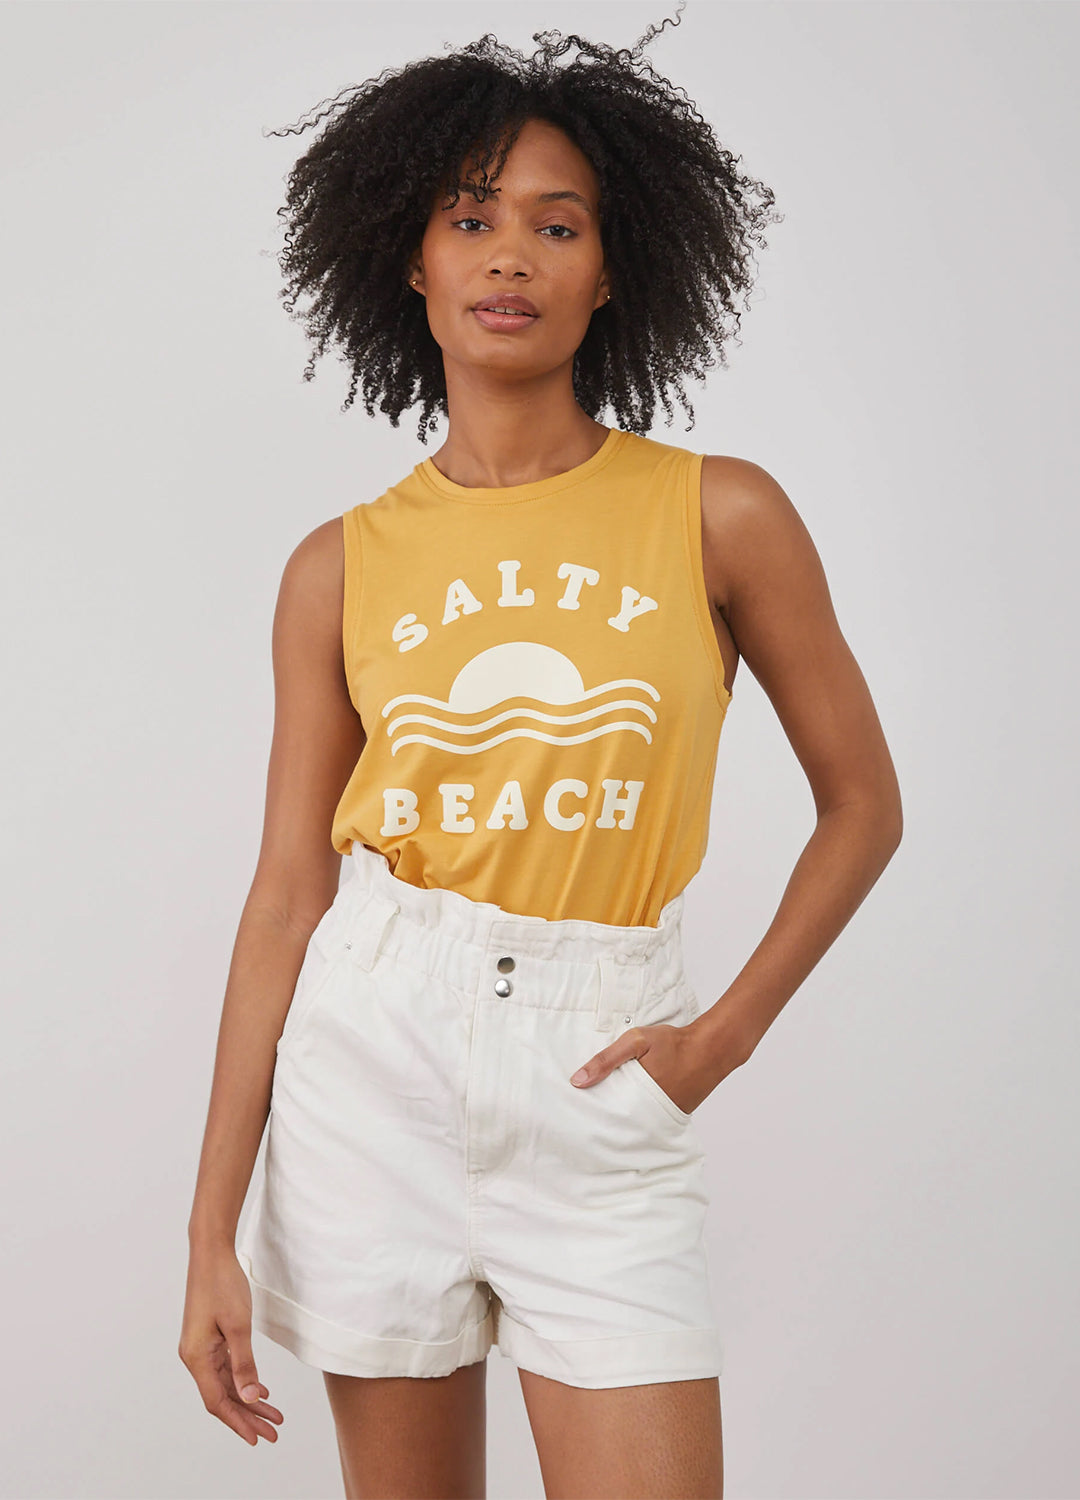 South Parade relaxed fit muscle tee adorned with Salty Beach print made of 100% Pima cotton in a happy honey yellow colour at Inner Beach Co, Toronto, Canada